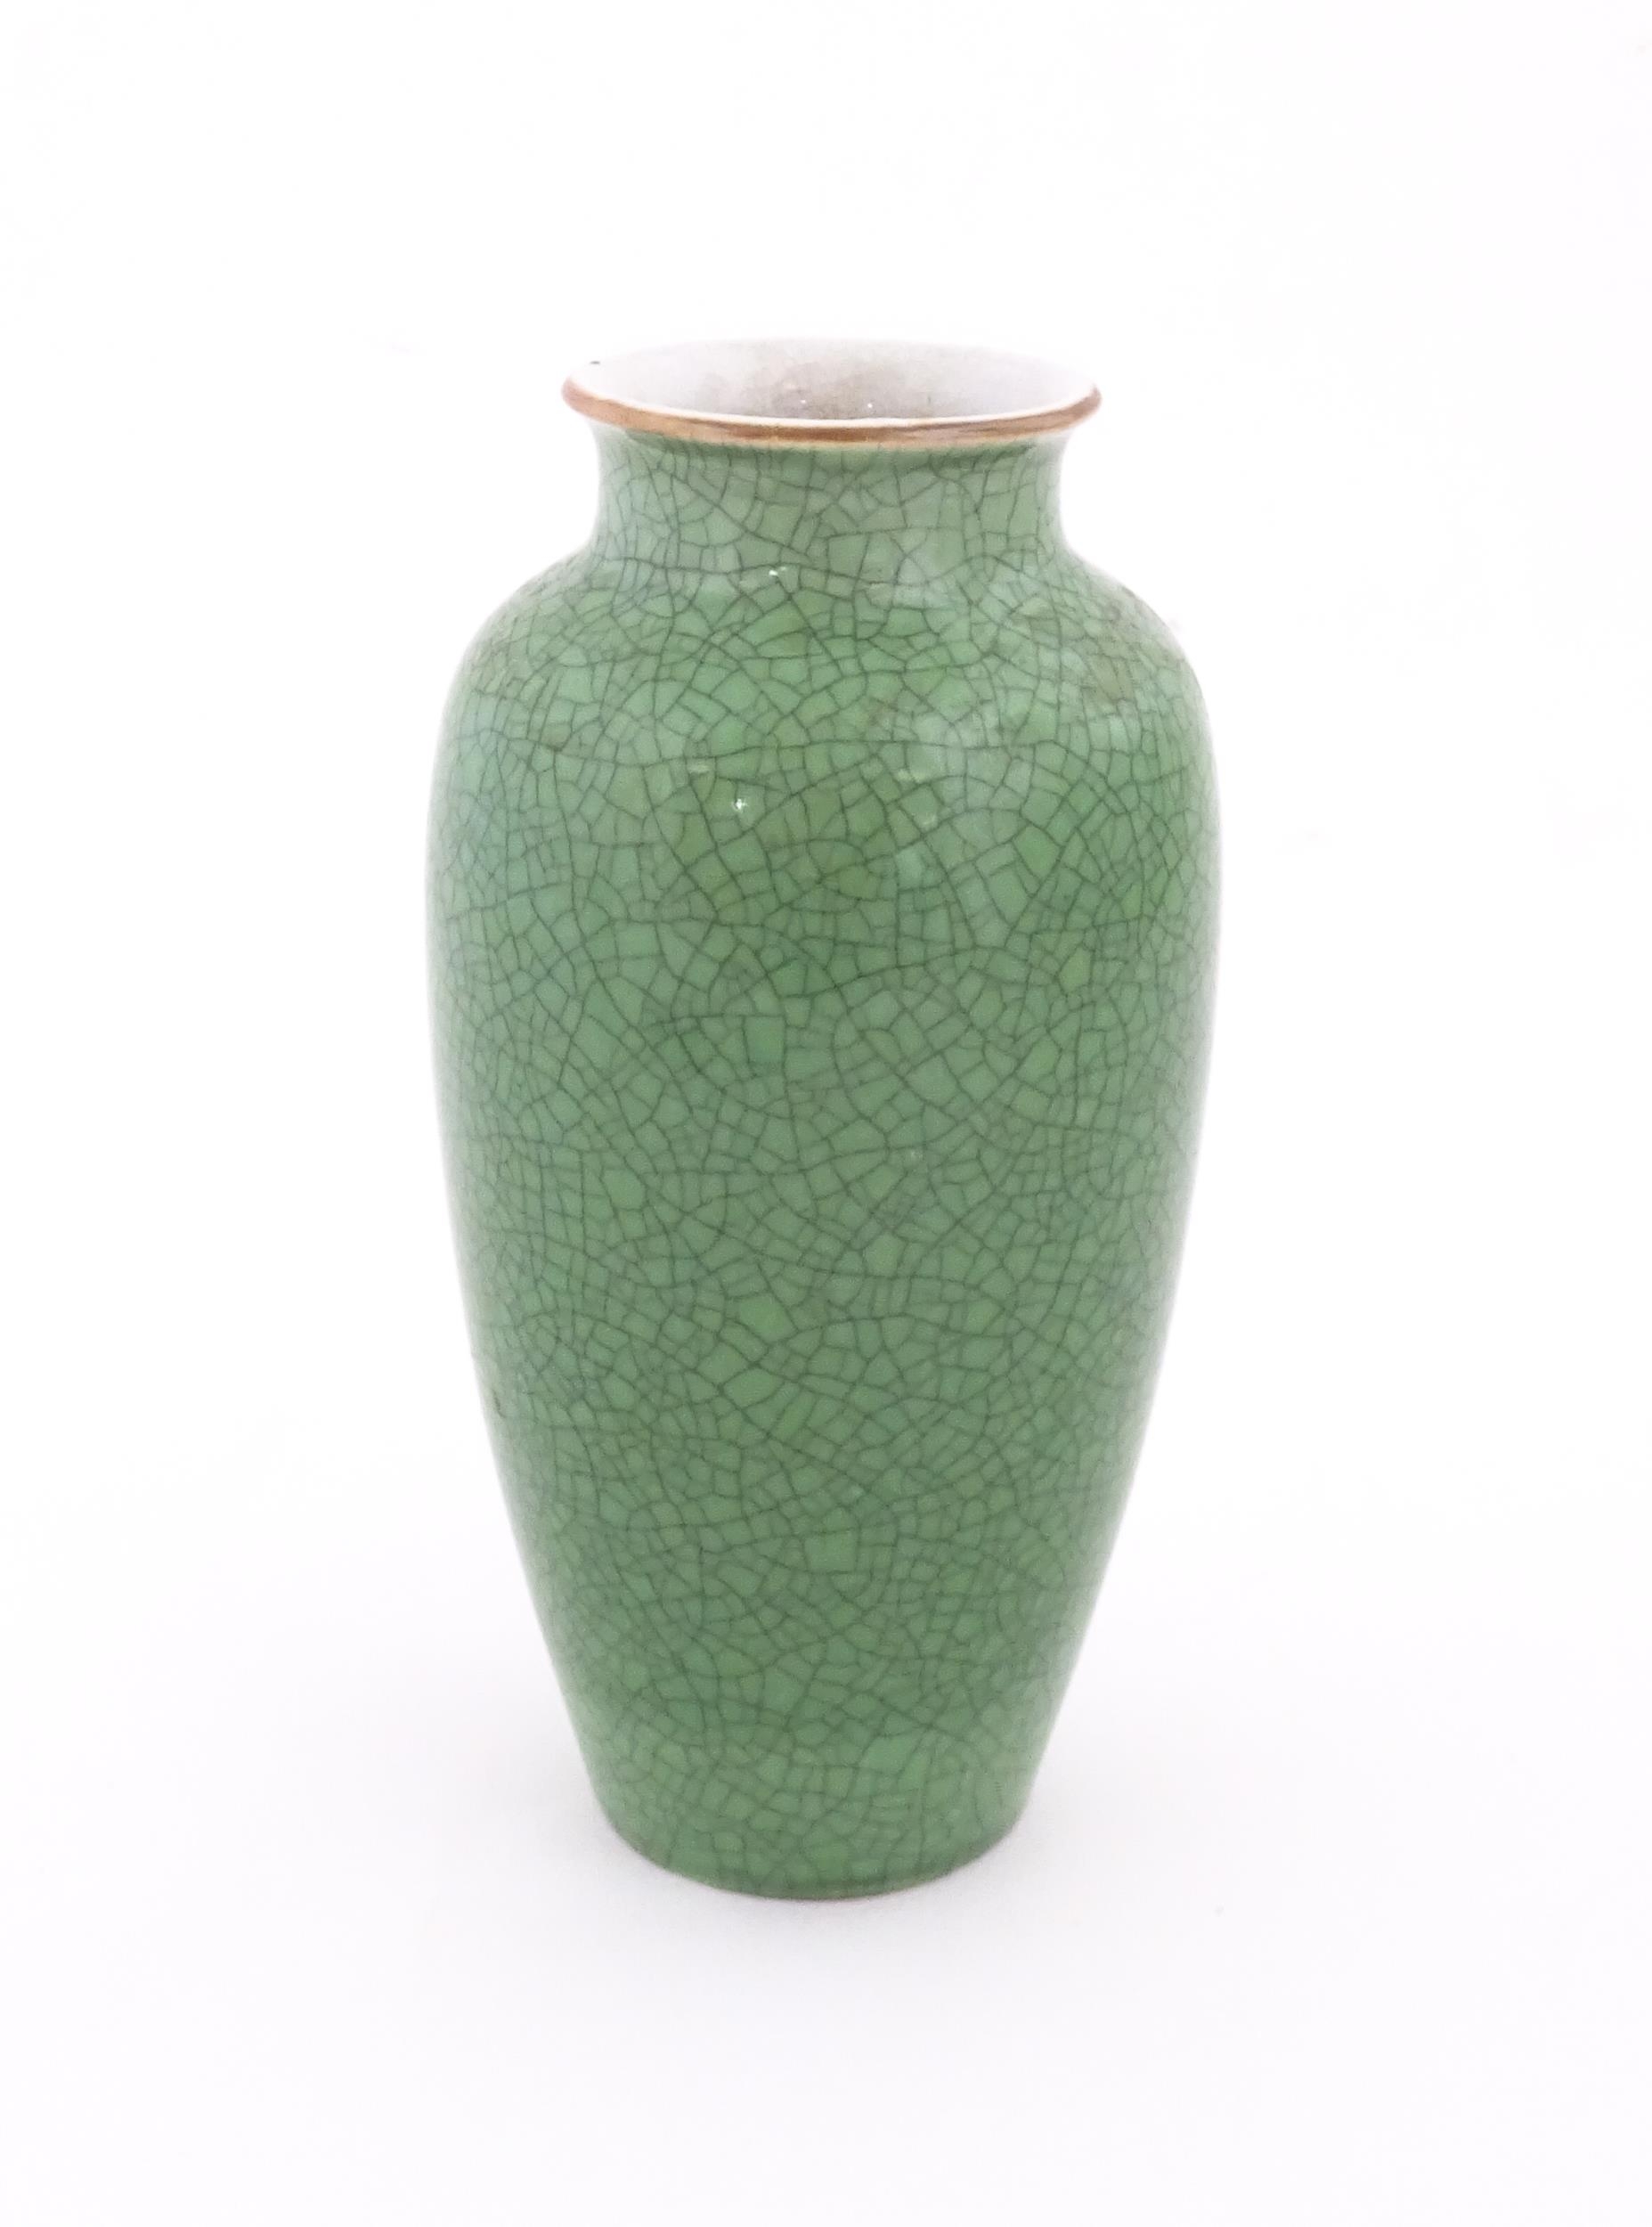 A Chinese vase with a green crackle glaze. Approx. 10 1/4" high Please Note - we do not make